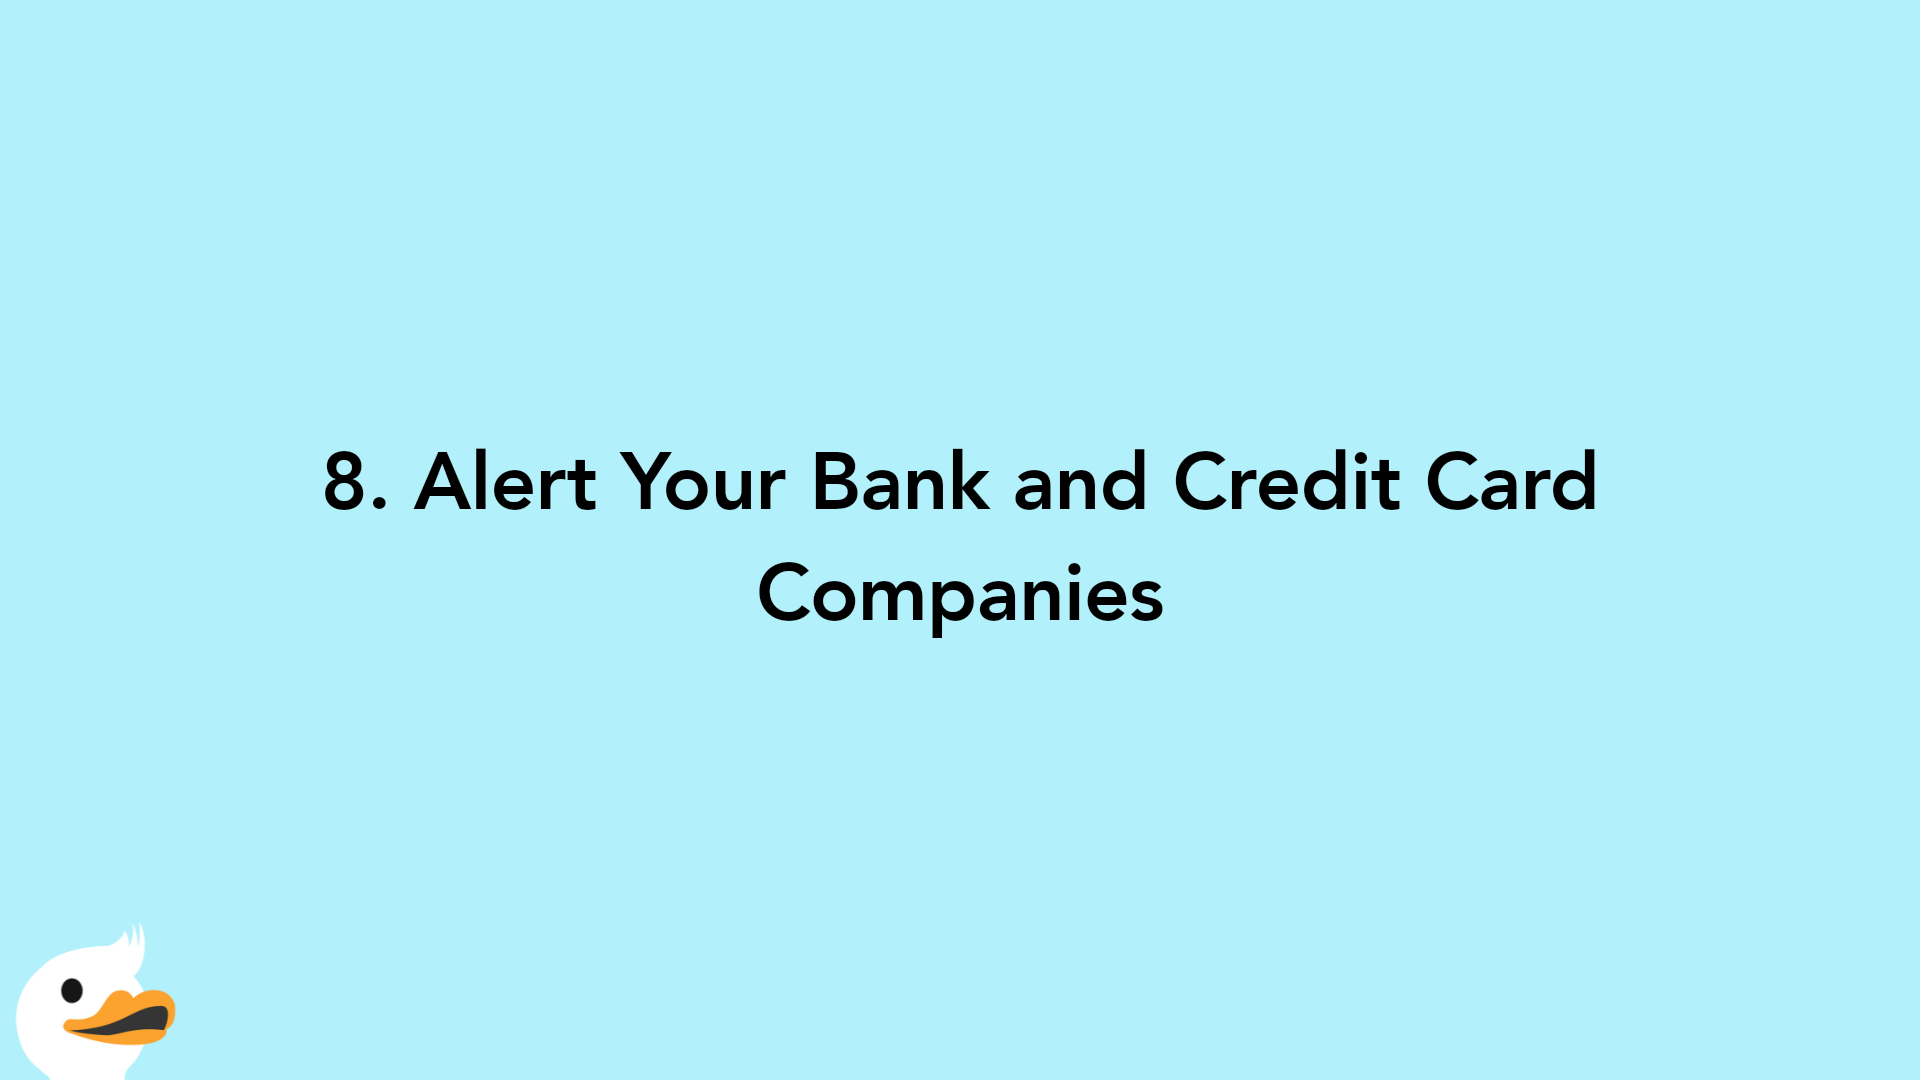 8. Alert Your Bank and Credit Card Companies